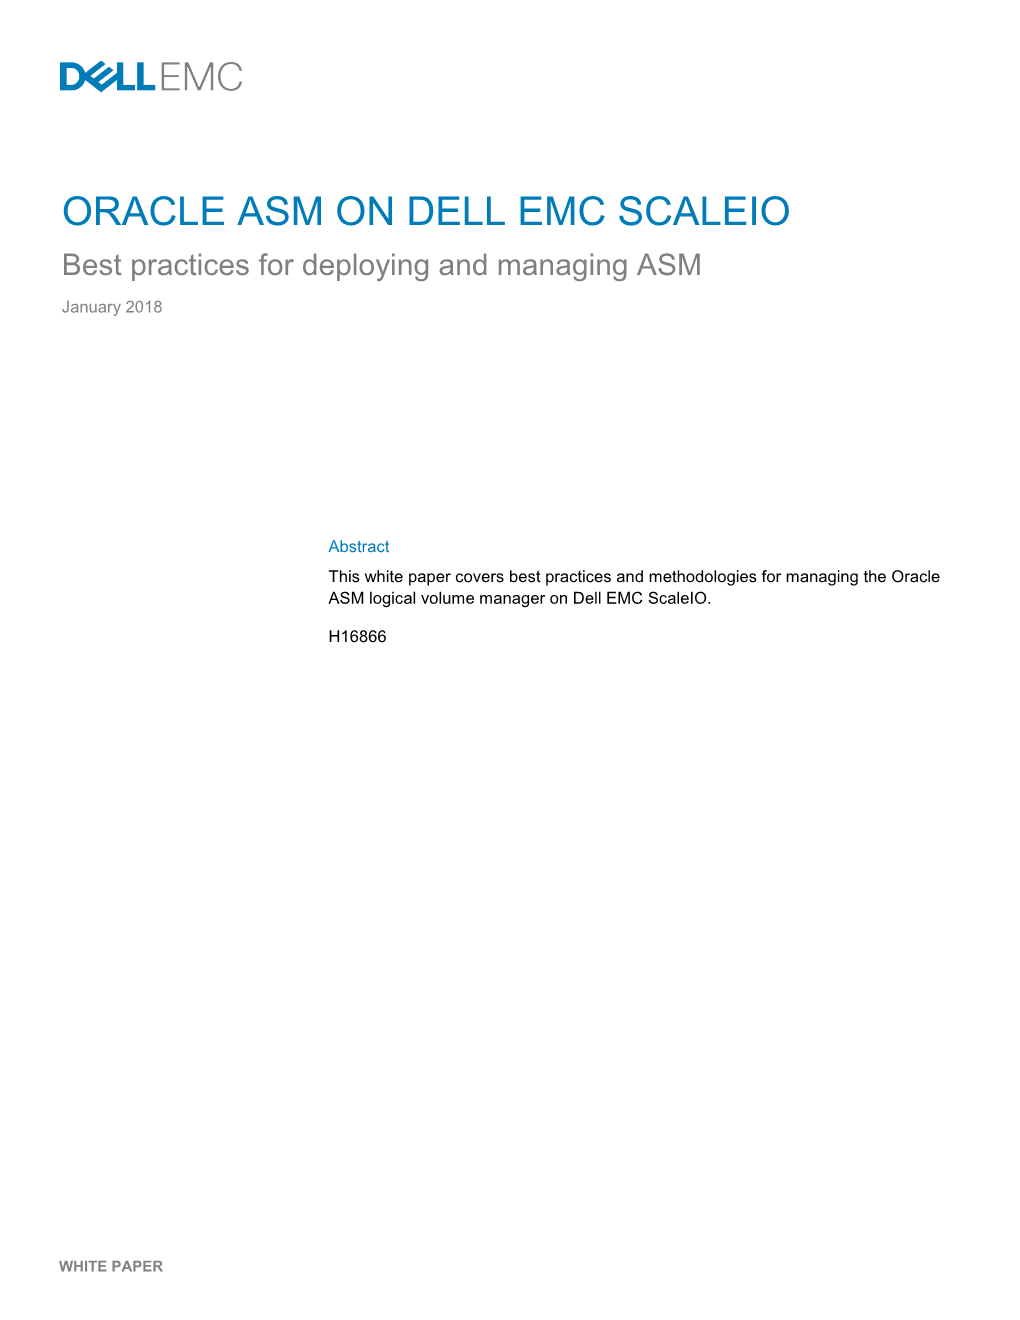 ORACLE ASM on DELL EMC SCALEIO Best Practices for Deploying and Managing ASM